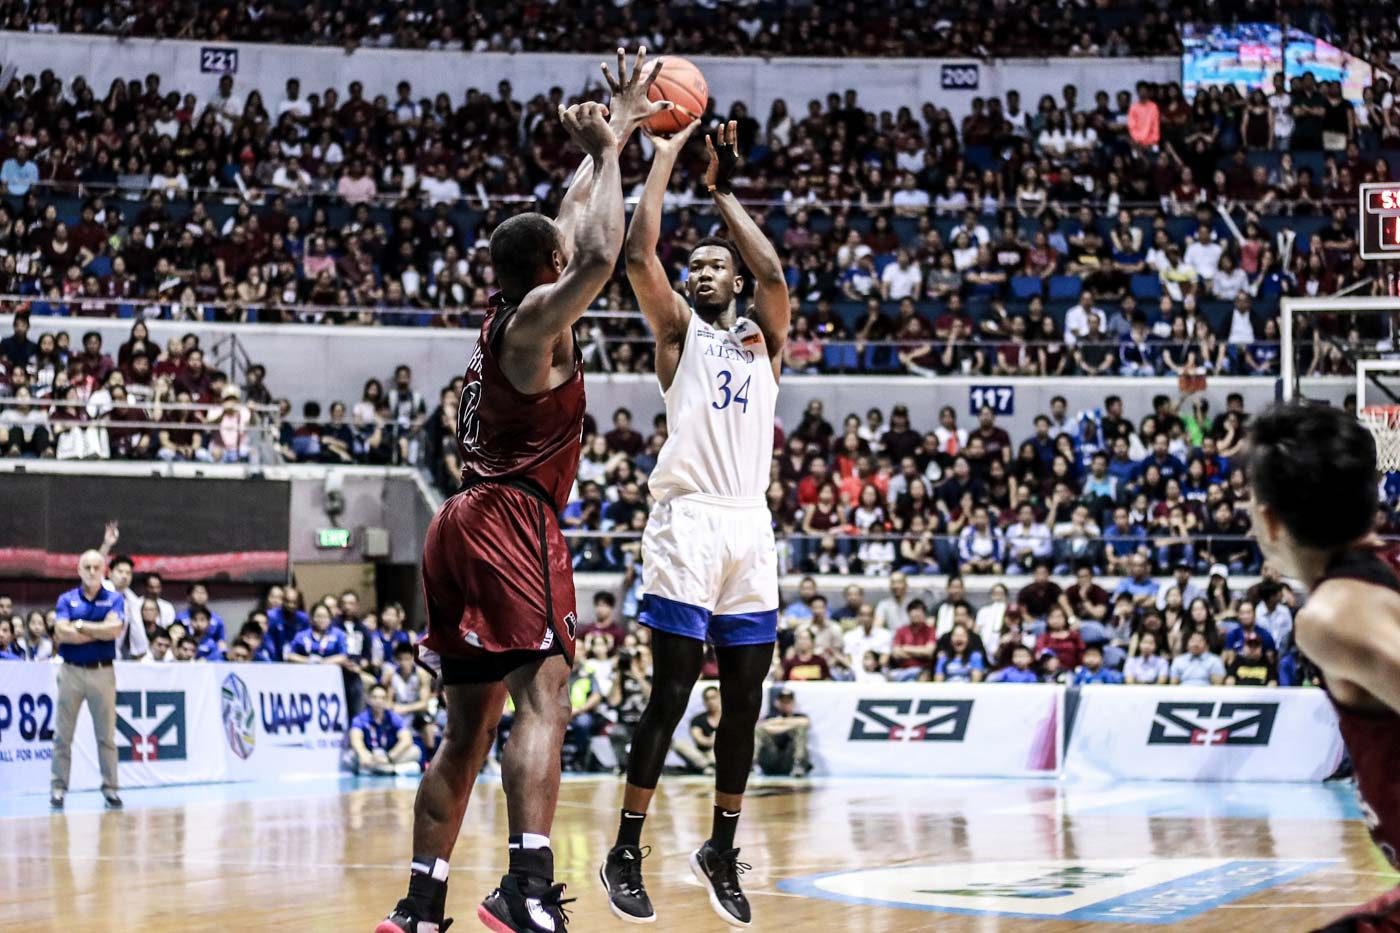 TEAM TOWERS. Ateneo's Ange Kouame wins the battle of the bigs as the Ivorian slotman posts 19 points, 15 rebounds, and 7 blocks. UP's Bright Akhuetie, meanwhile, gets into early foul trouble to finish with a measly 6 points. Photo by Michael Gatpandan/Rappler    